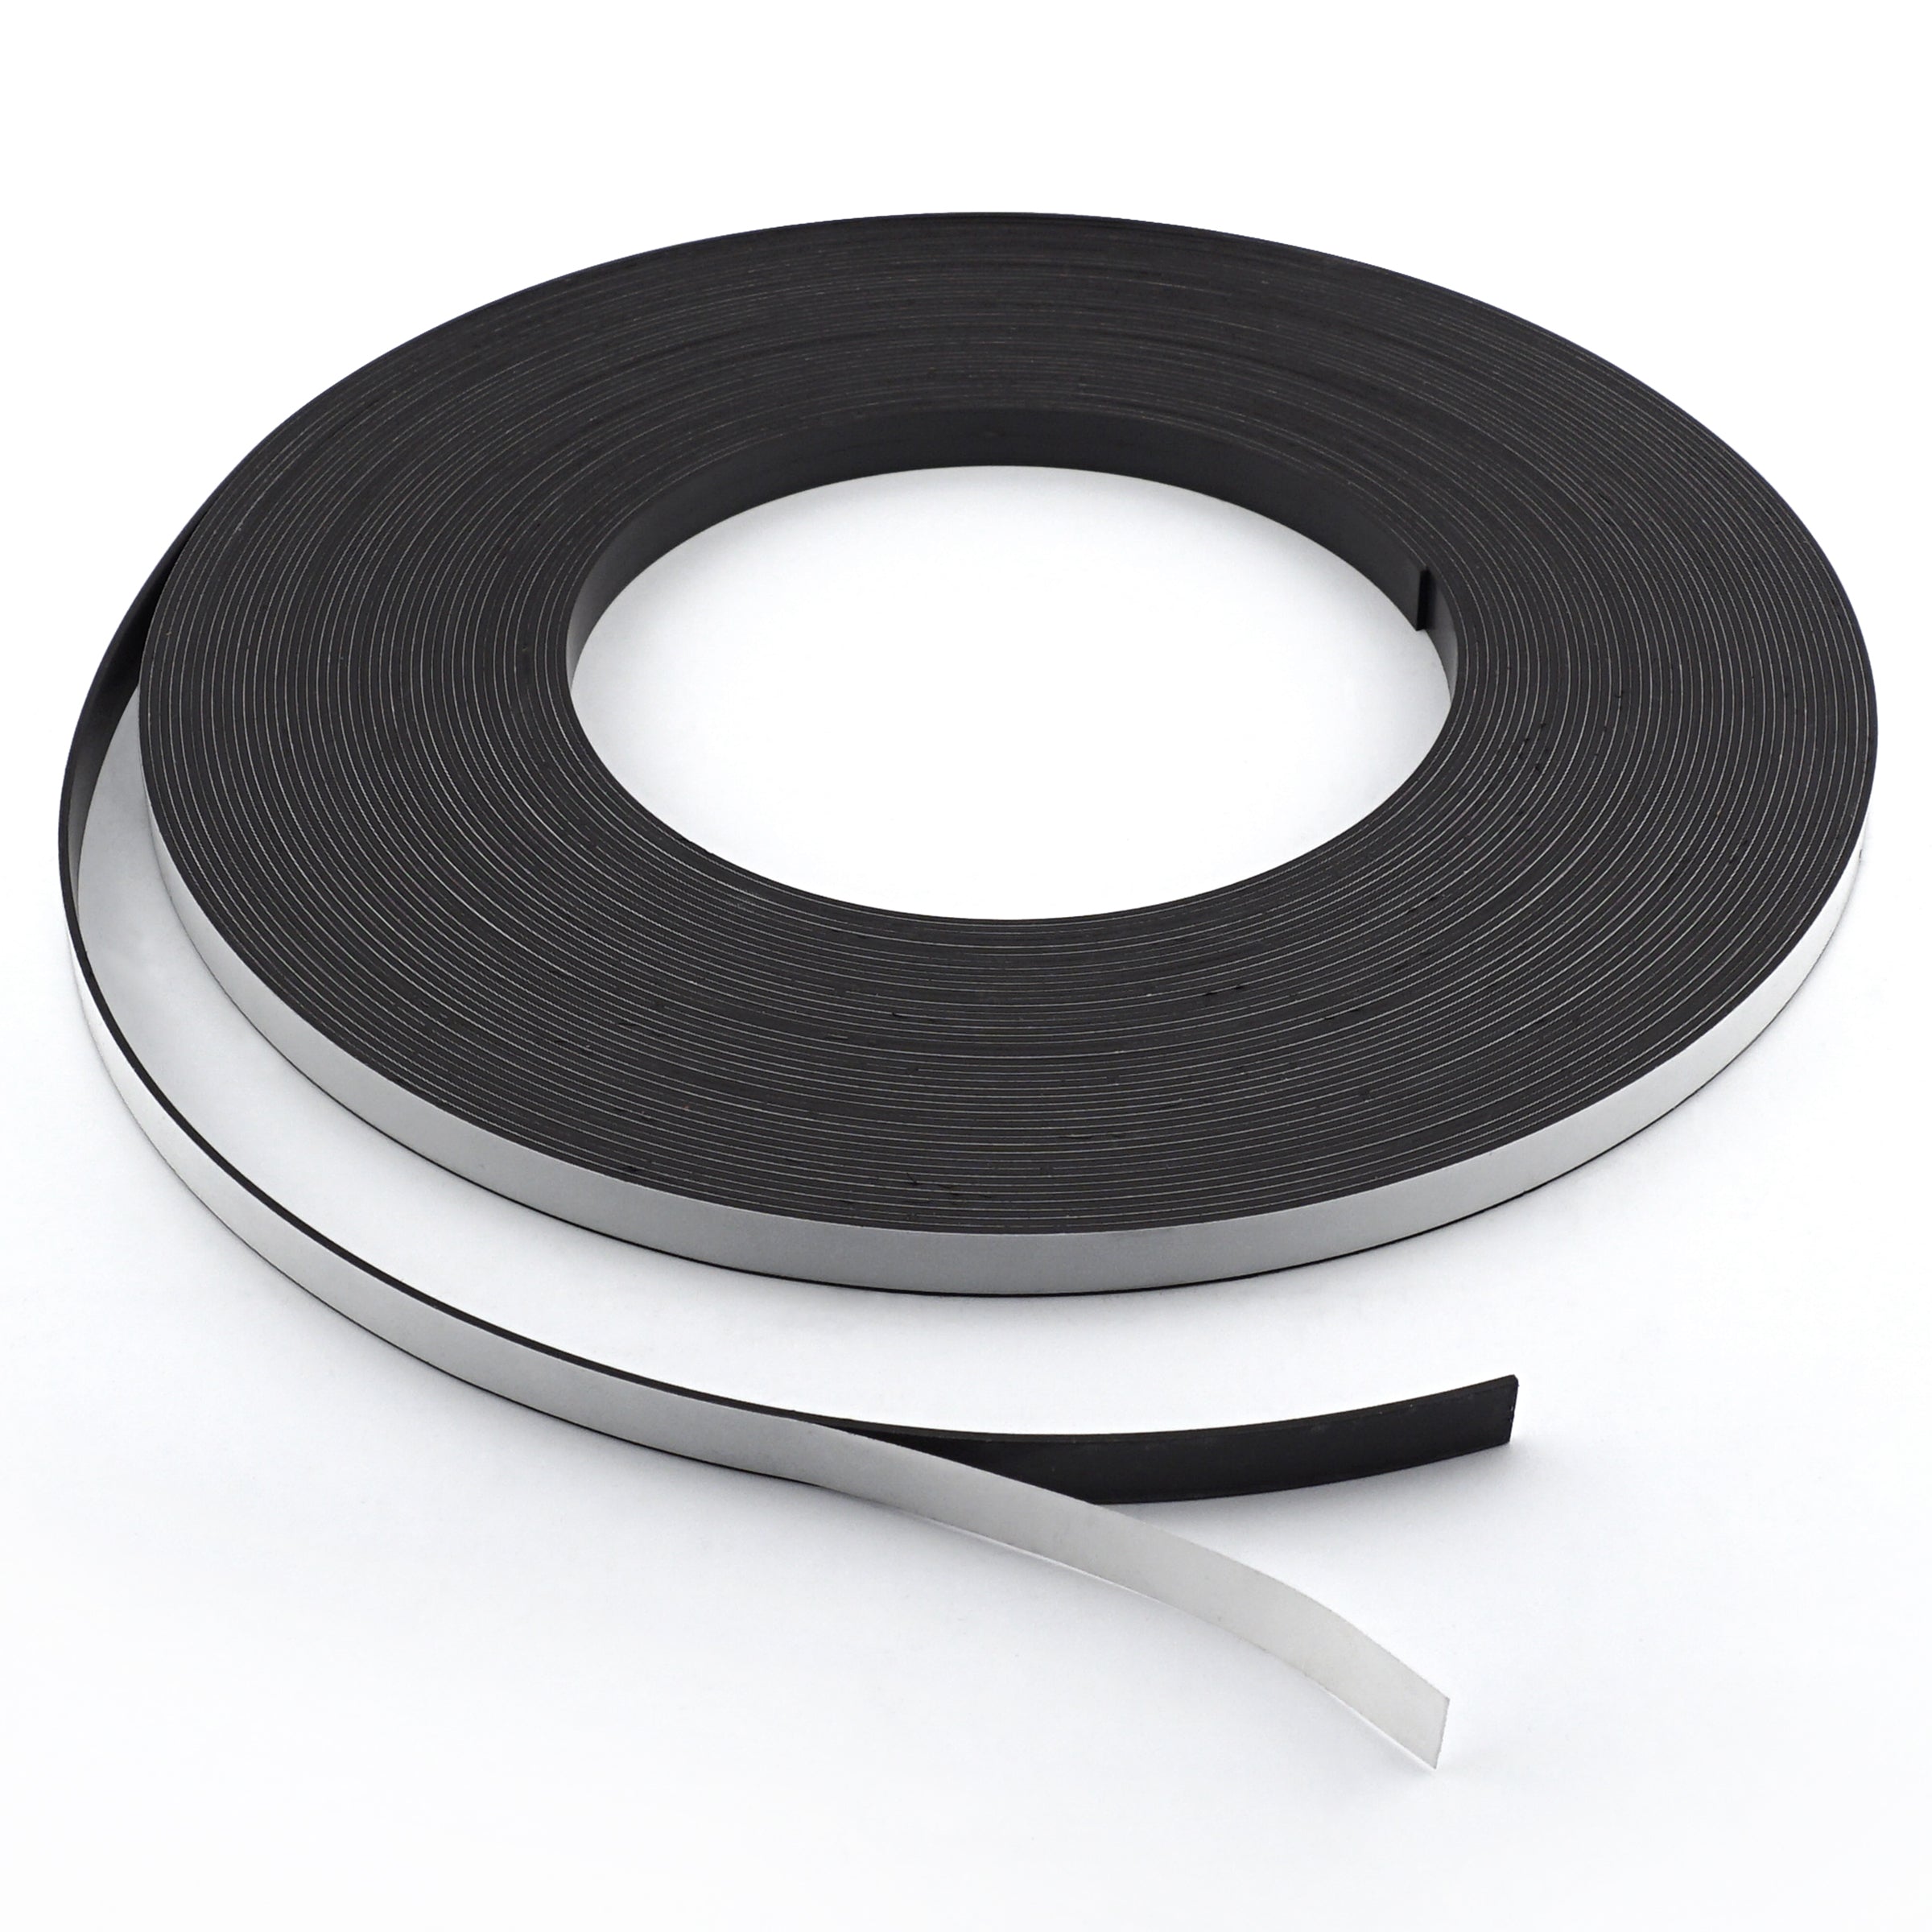 Magnetic Tape Strips with Adhesive Backing Perfect for DIY, Art Projec –  Emaratshop